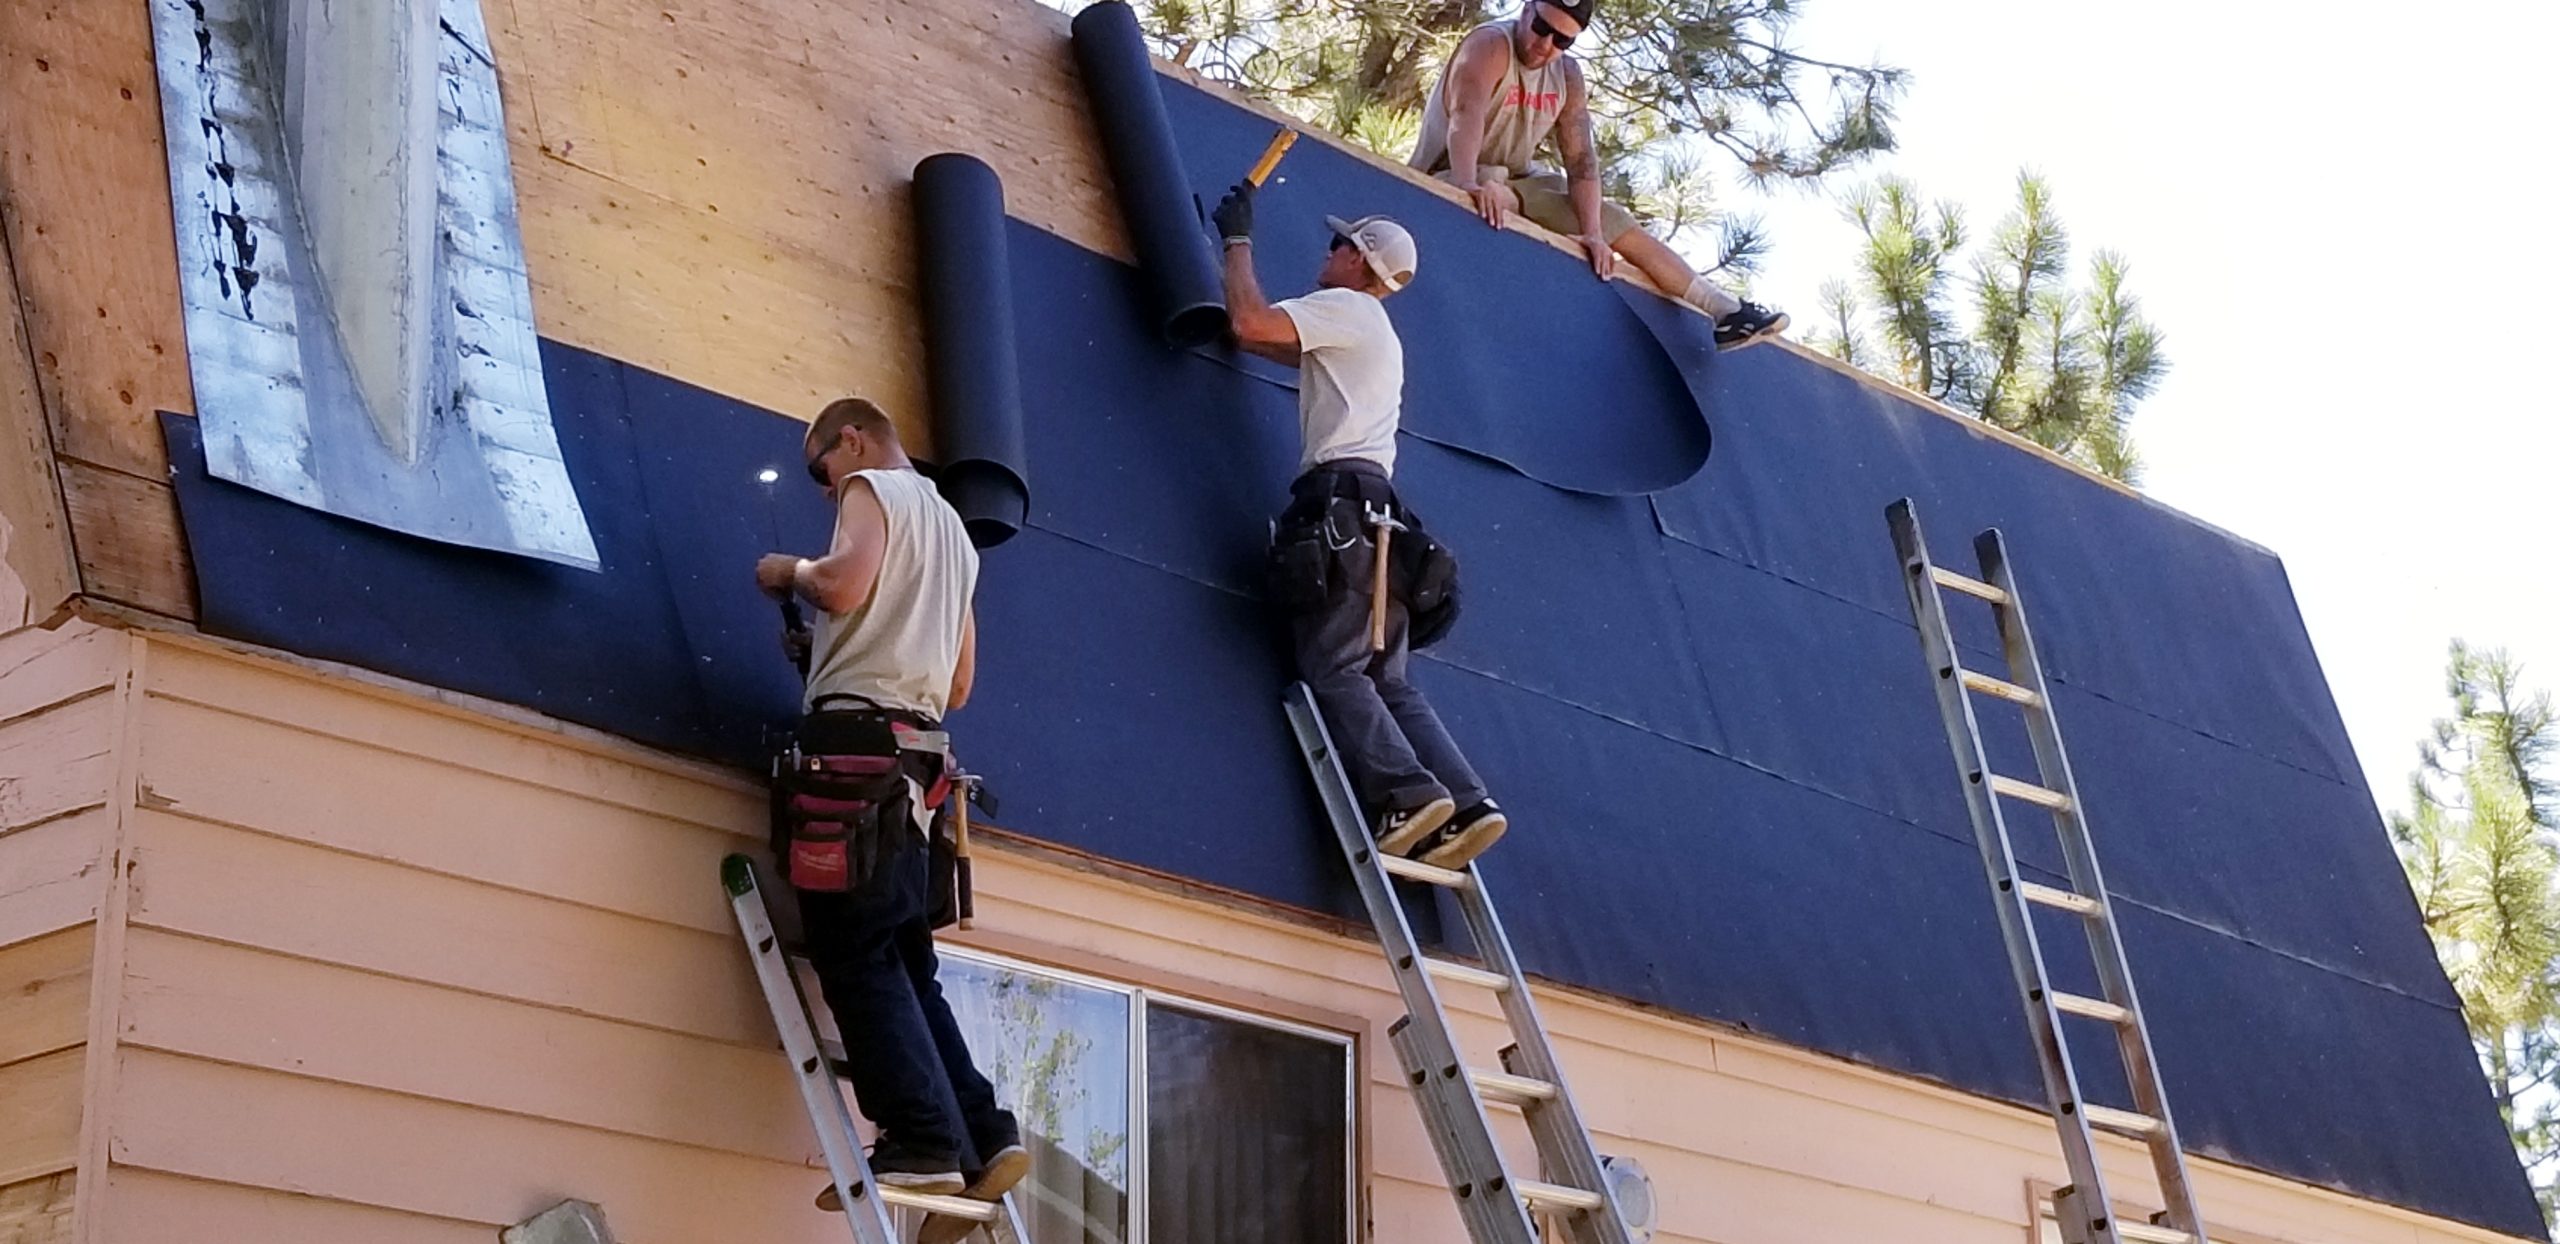 3 Men on Side of Roof Nailing Down Black Fabric